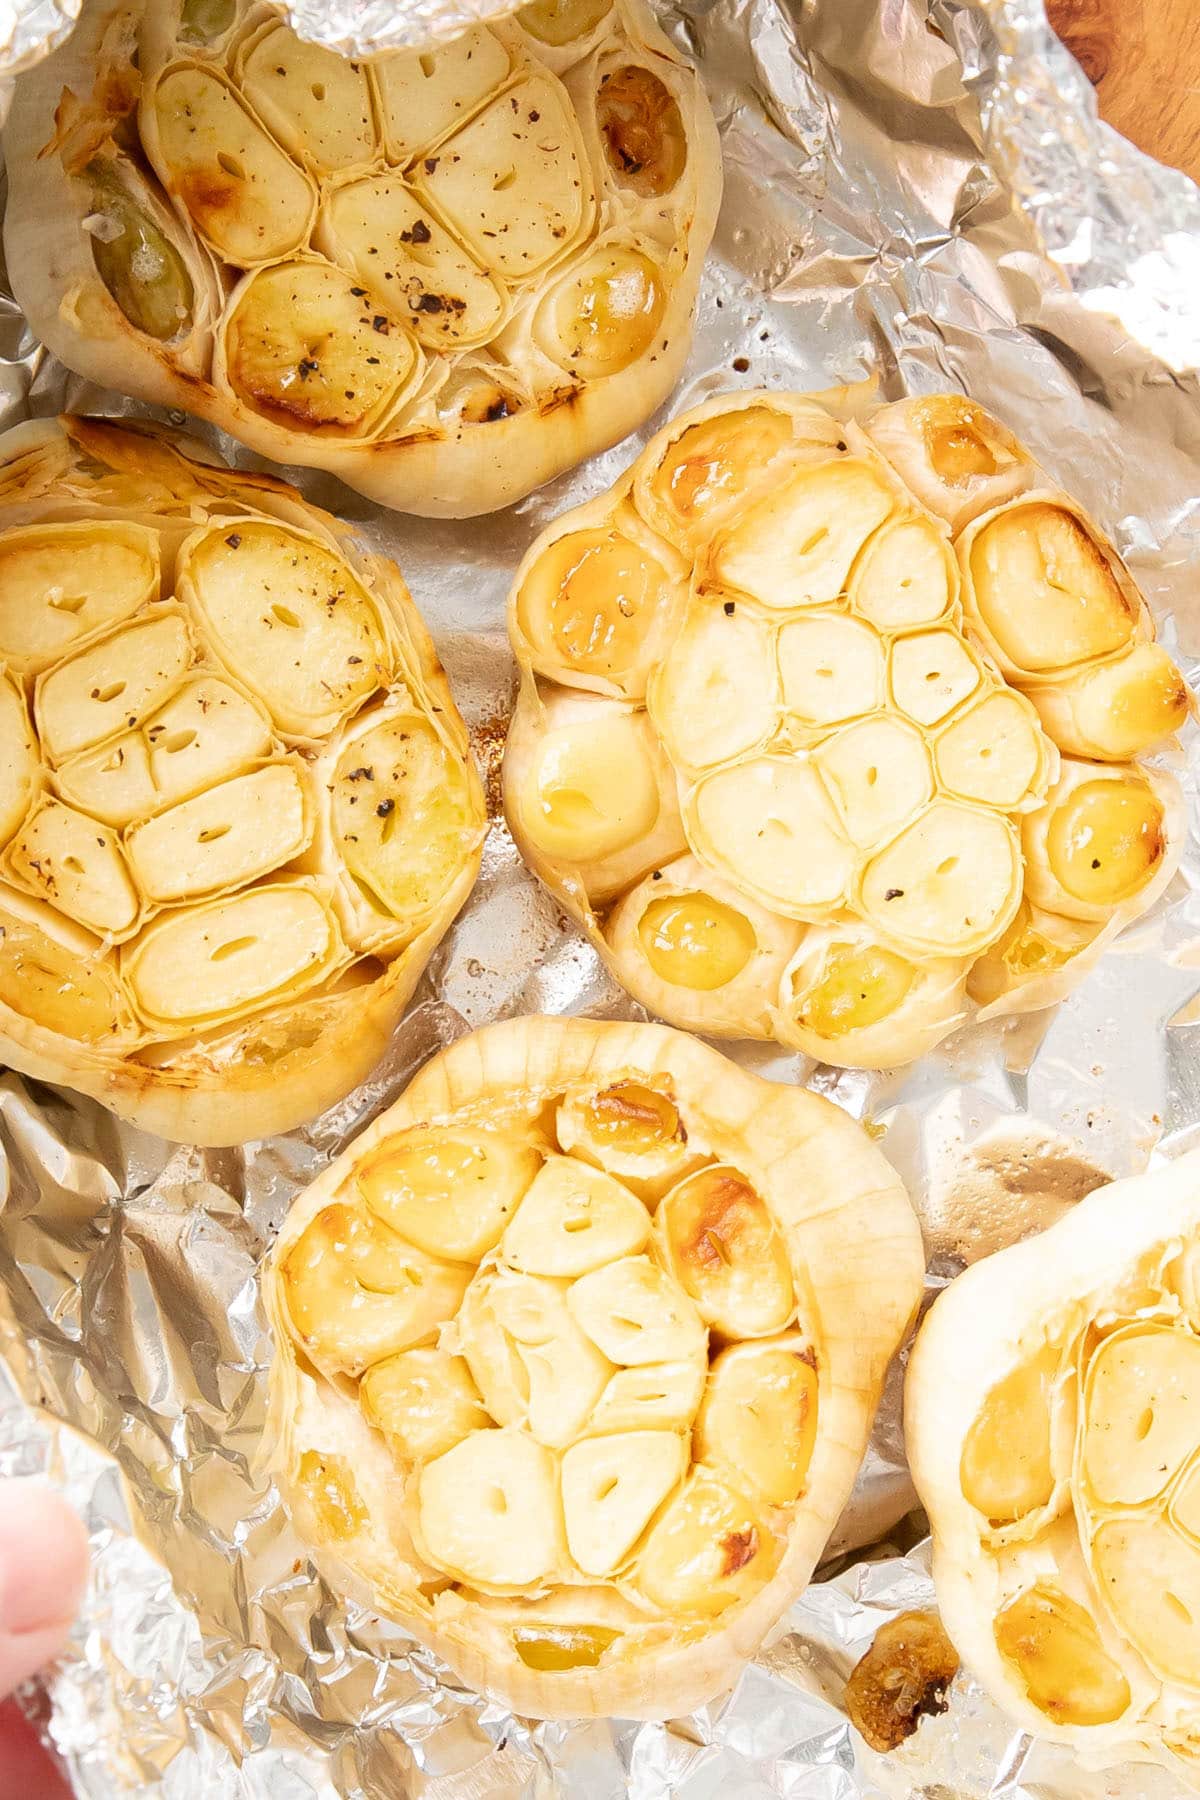 Two photos showing How to Make Roasted Garlic Bread – roast the garlic